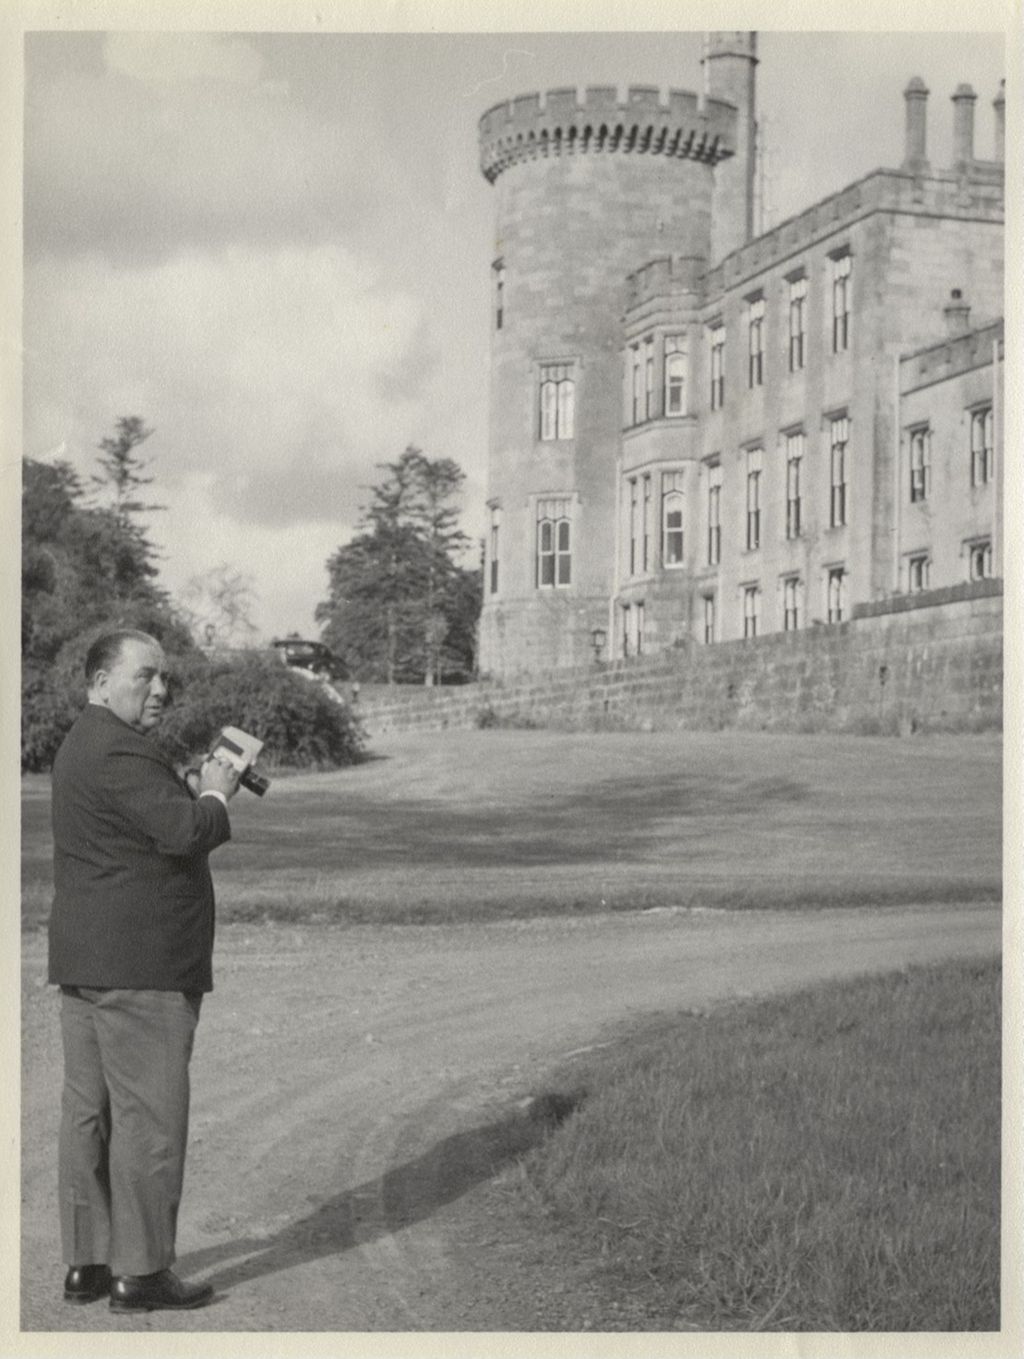 Trip to Ireland, Richard J. Daley with a camera outside a castle